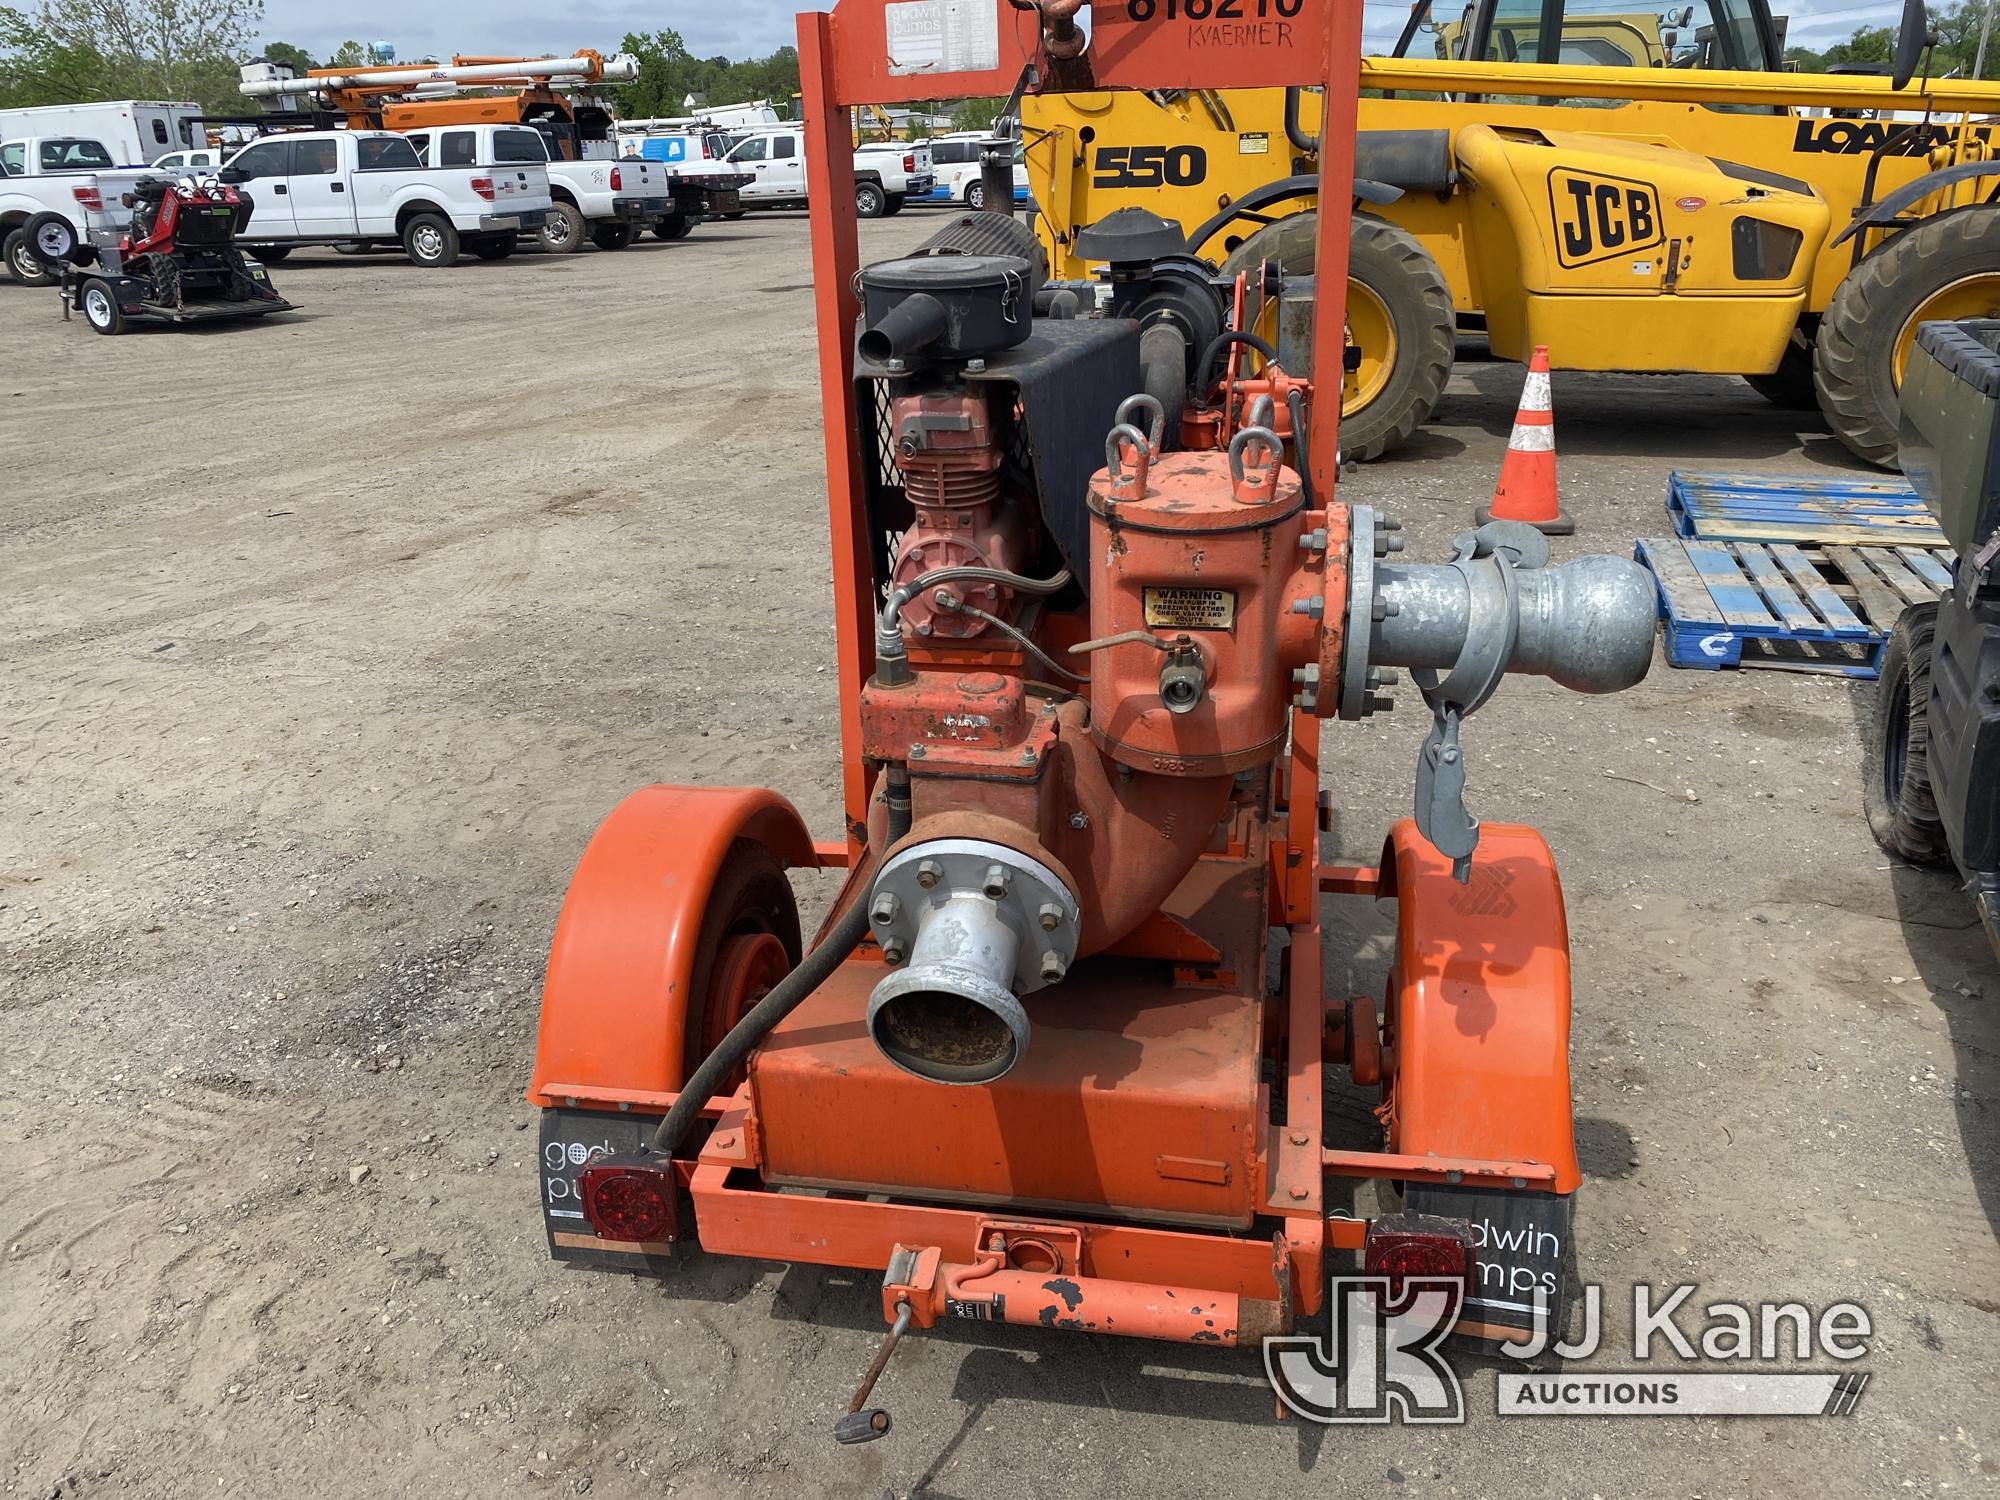 (Plymouth Meeting, PA) Goodwin CDM100 Water Pump, Trailer Mtd. No Title) (Condition Unknown